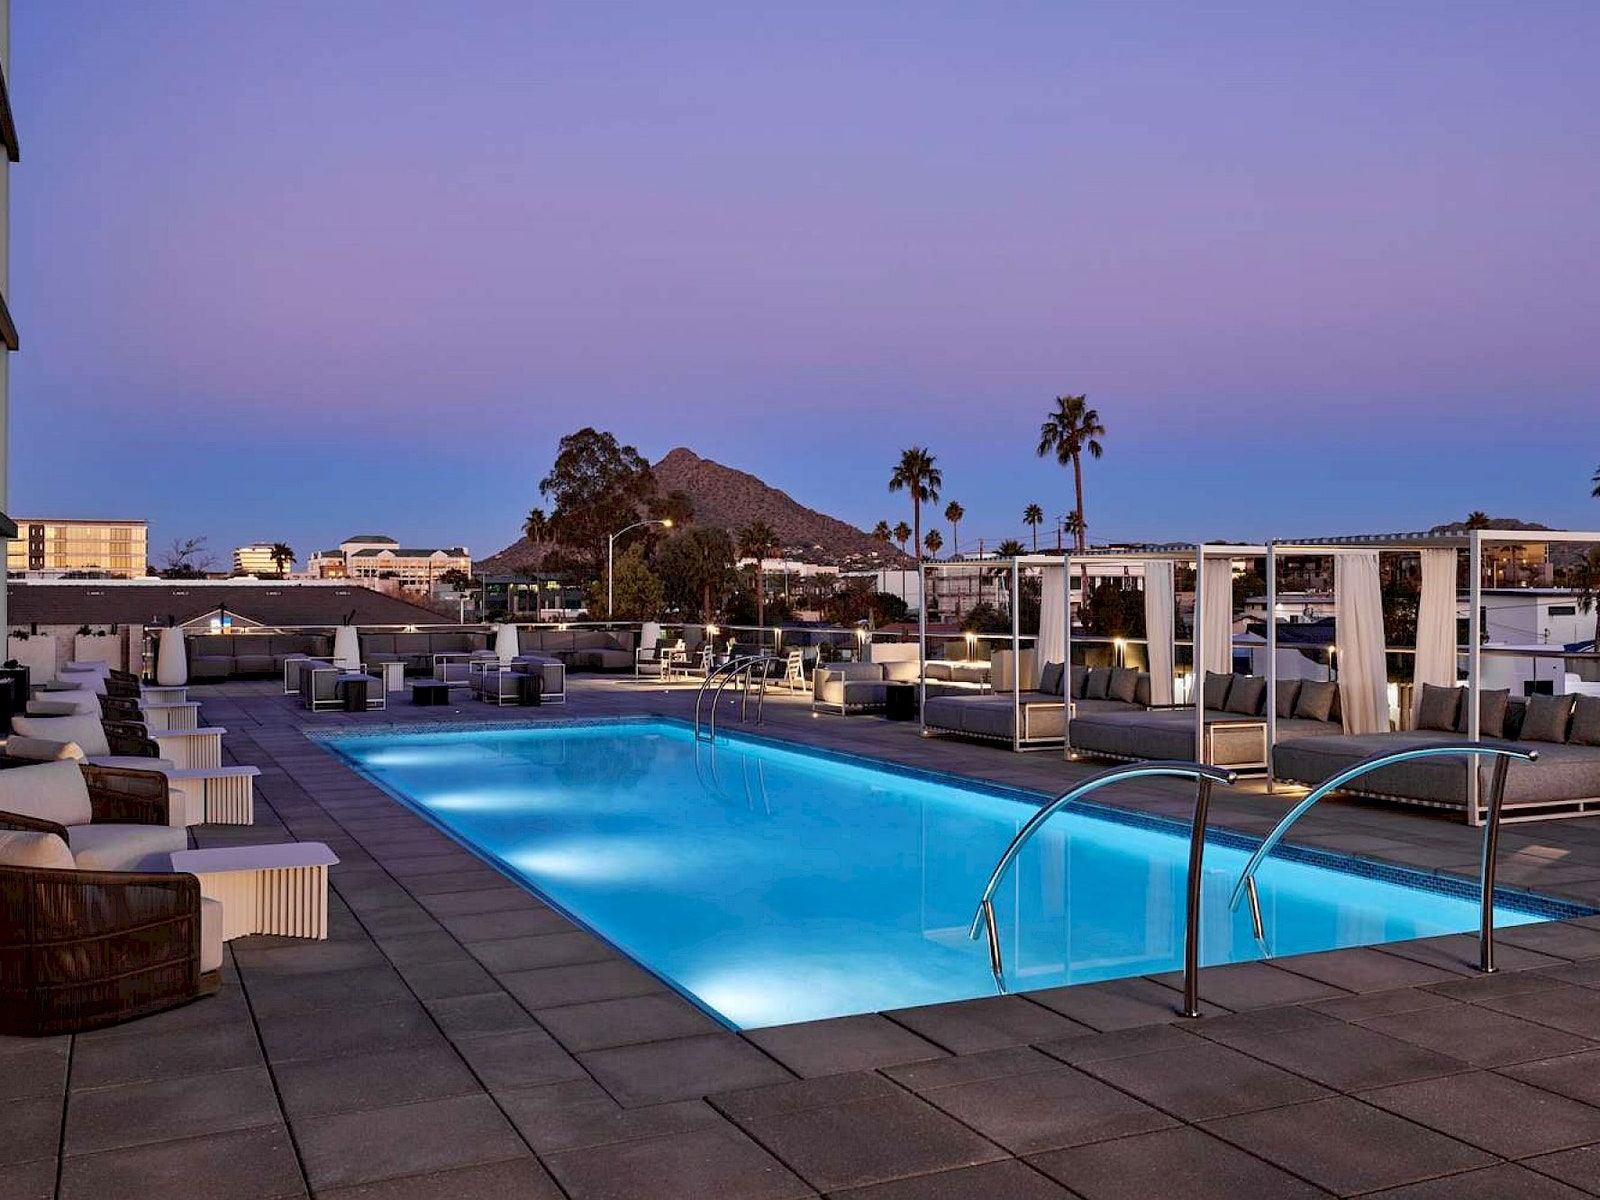 10 Best Hotels in Phoenix and Scottsdale